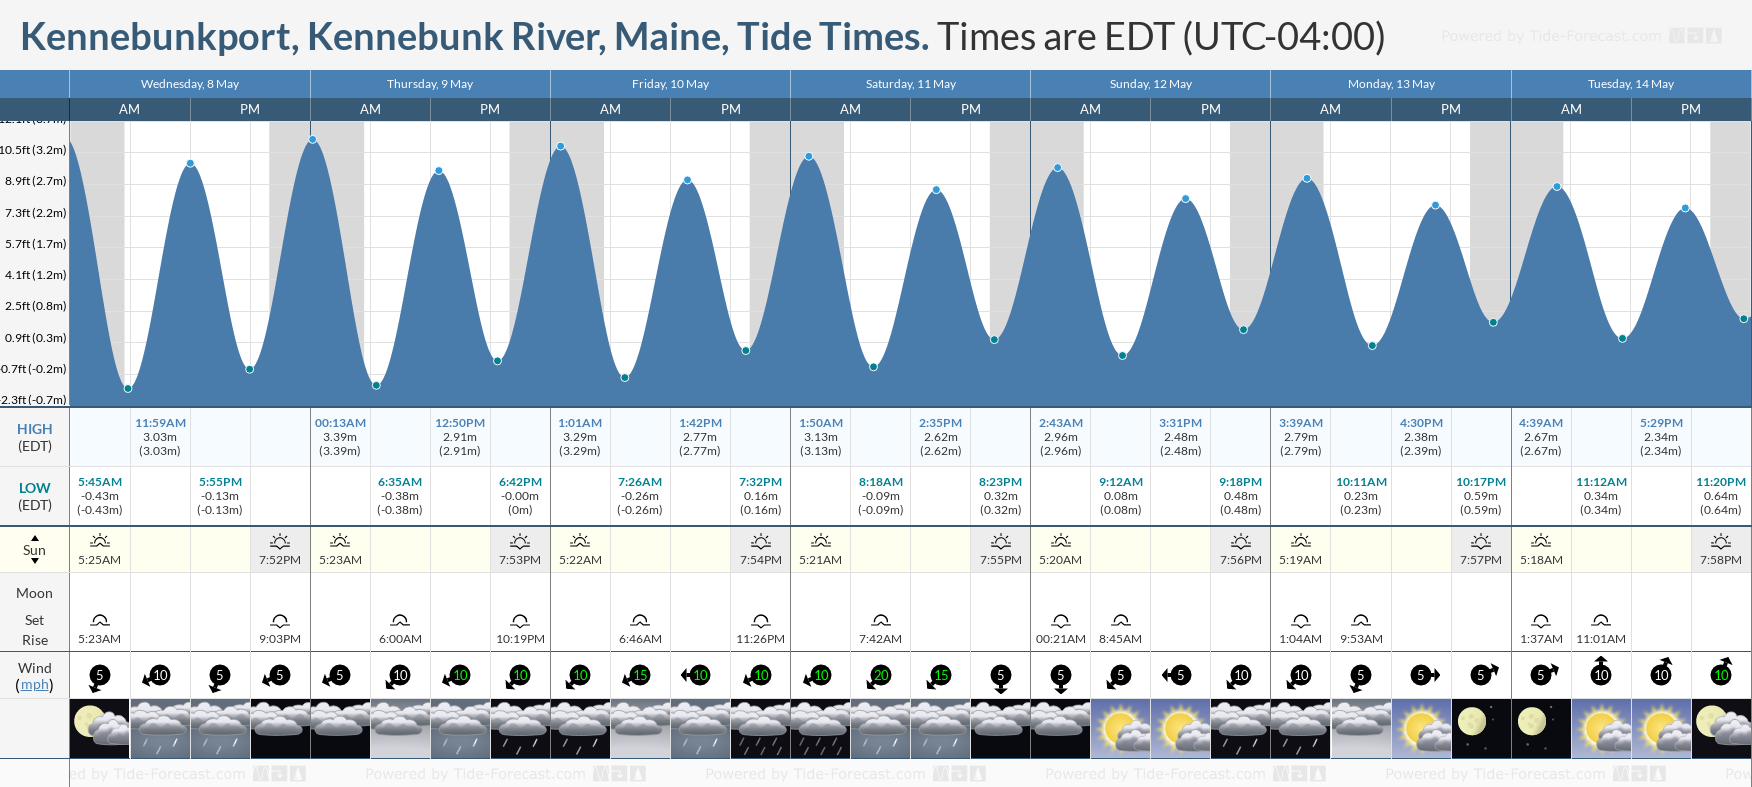 Kennebunkport, Kennebunk River, Maine Tide Chart including high and low tide times for the next 7 days